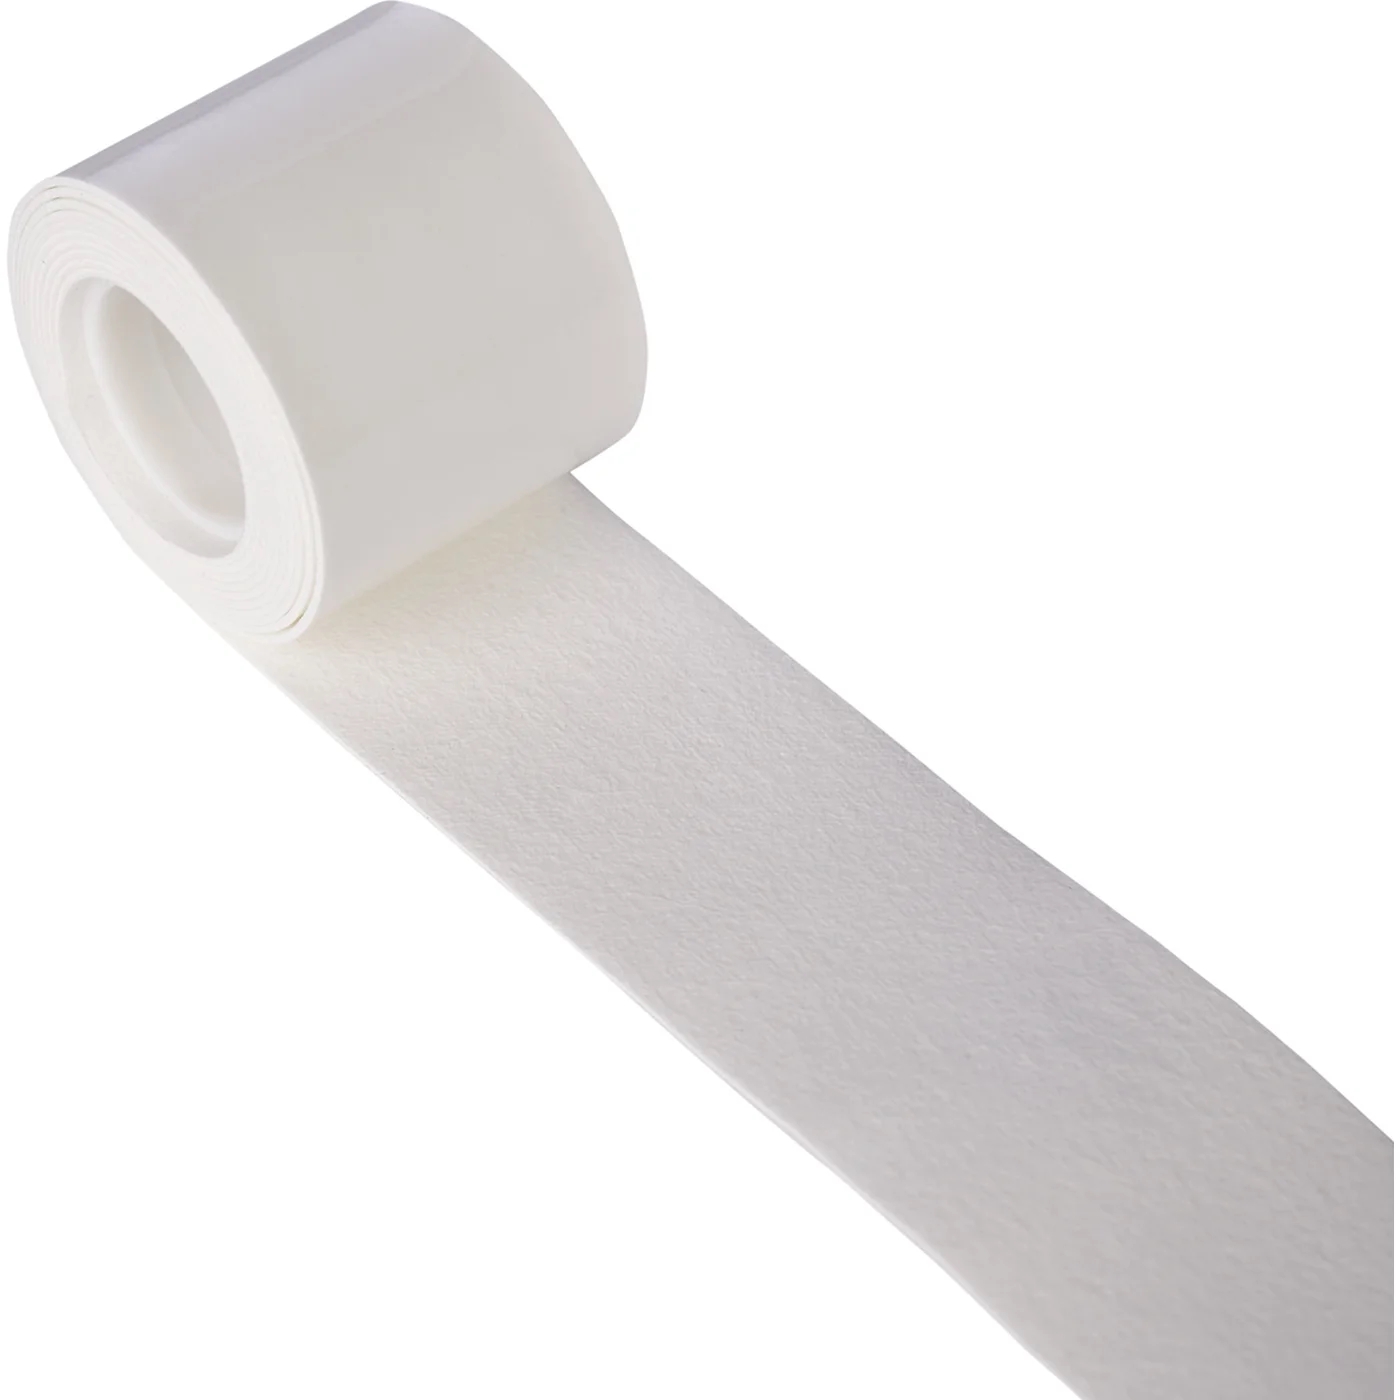 PRO TOUCH GRIFFBAND OVER GRIP 200 White 862MNIuQ